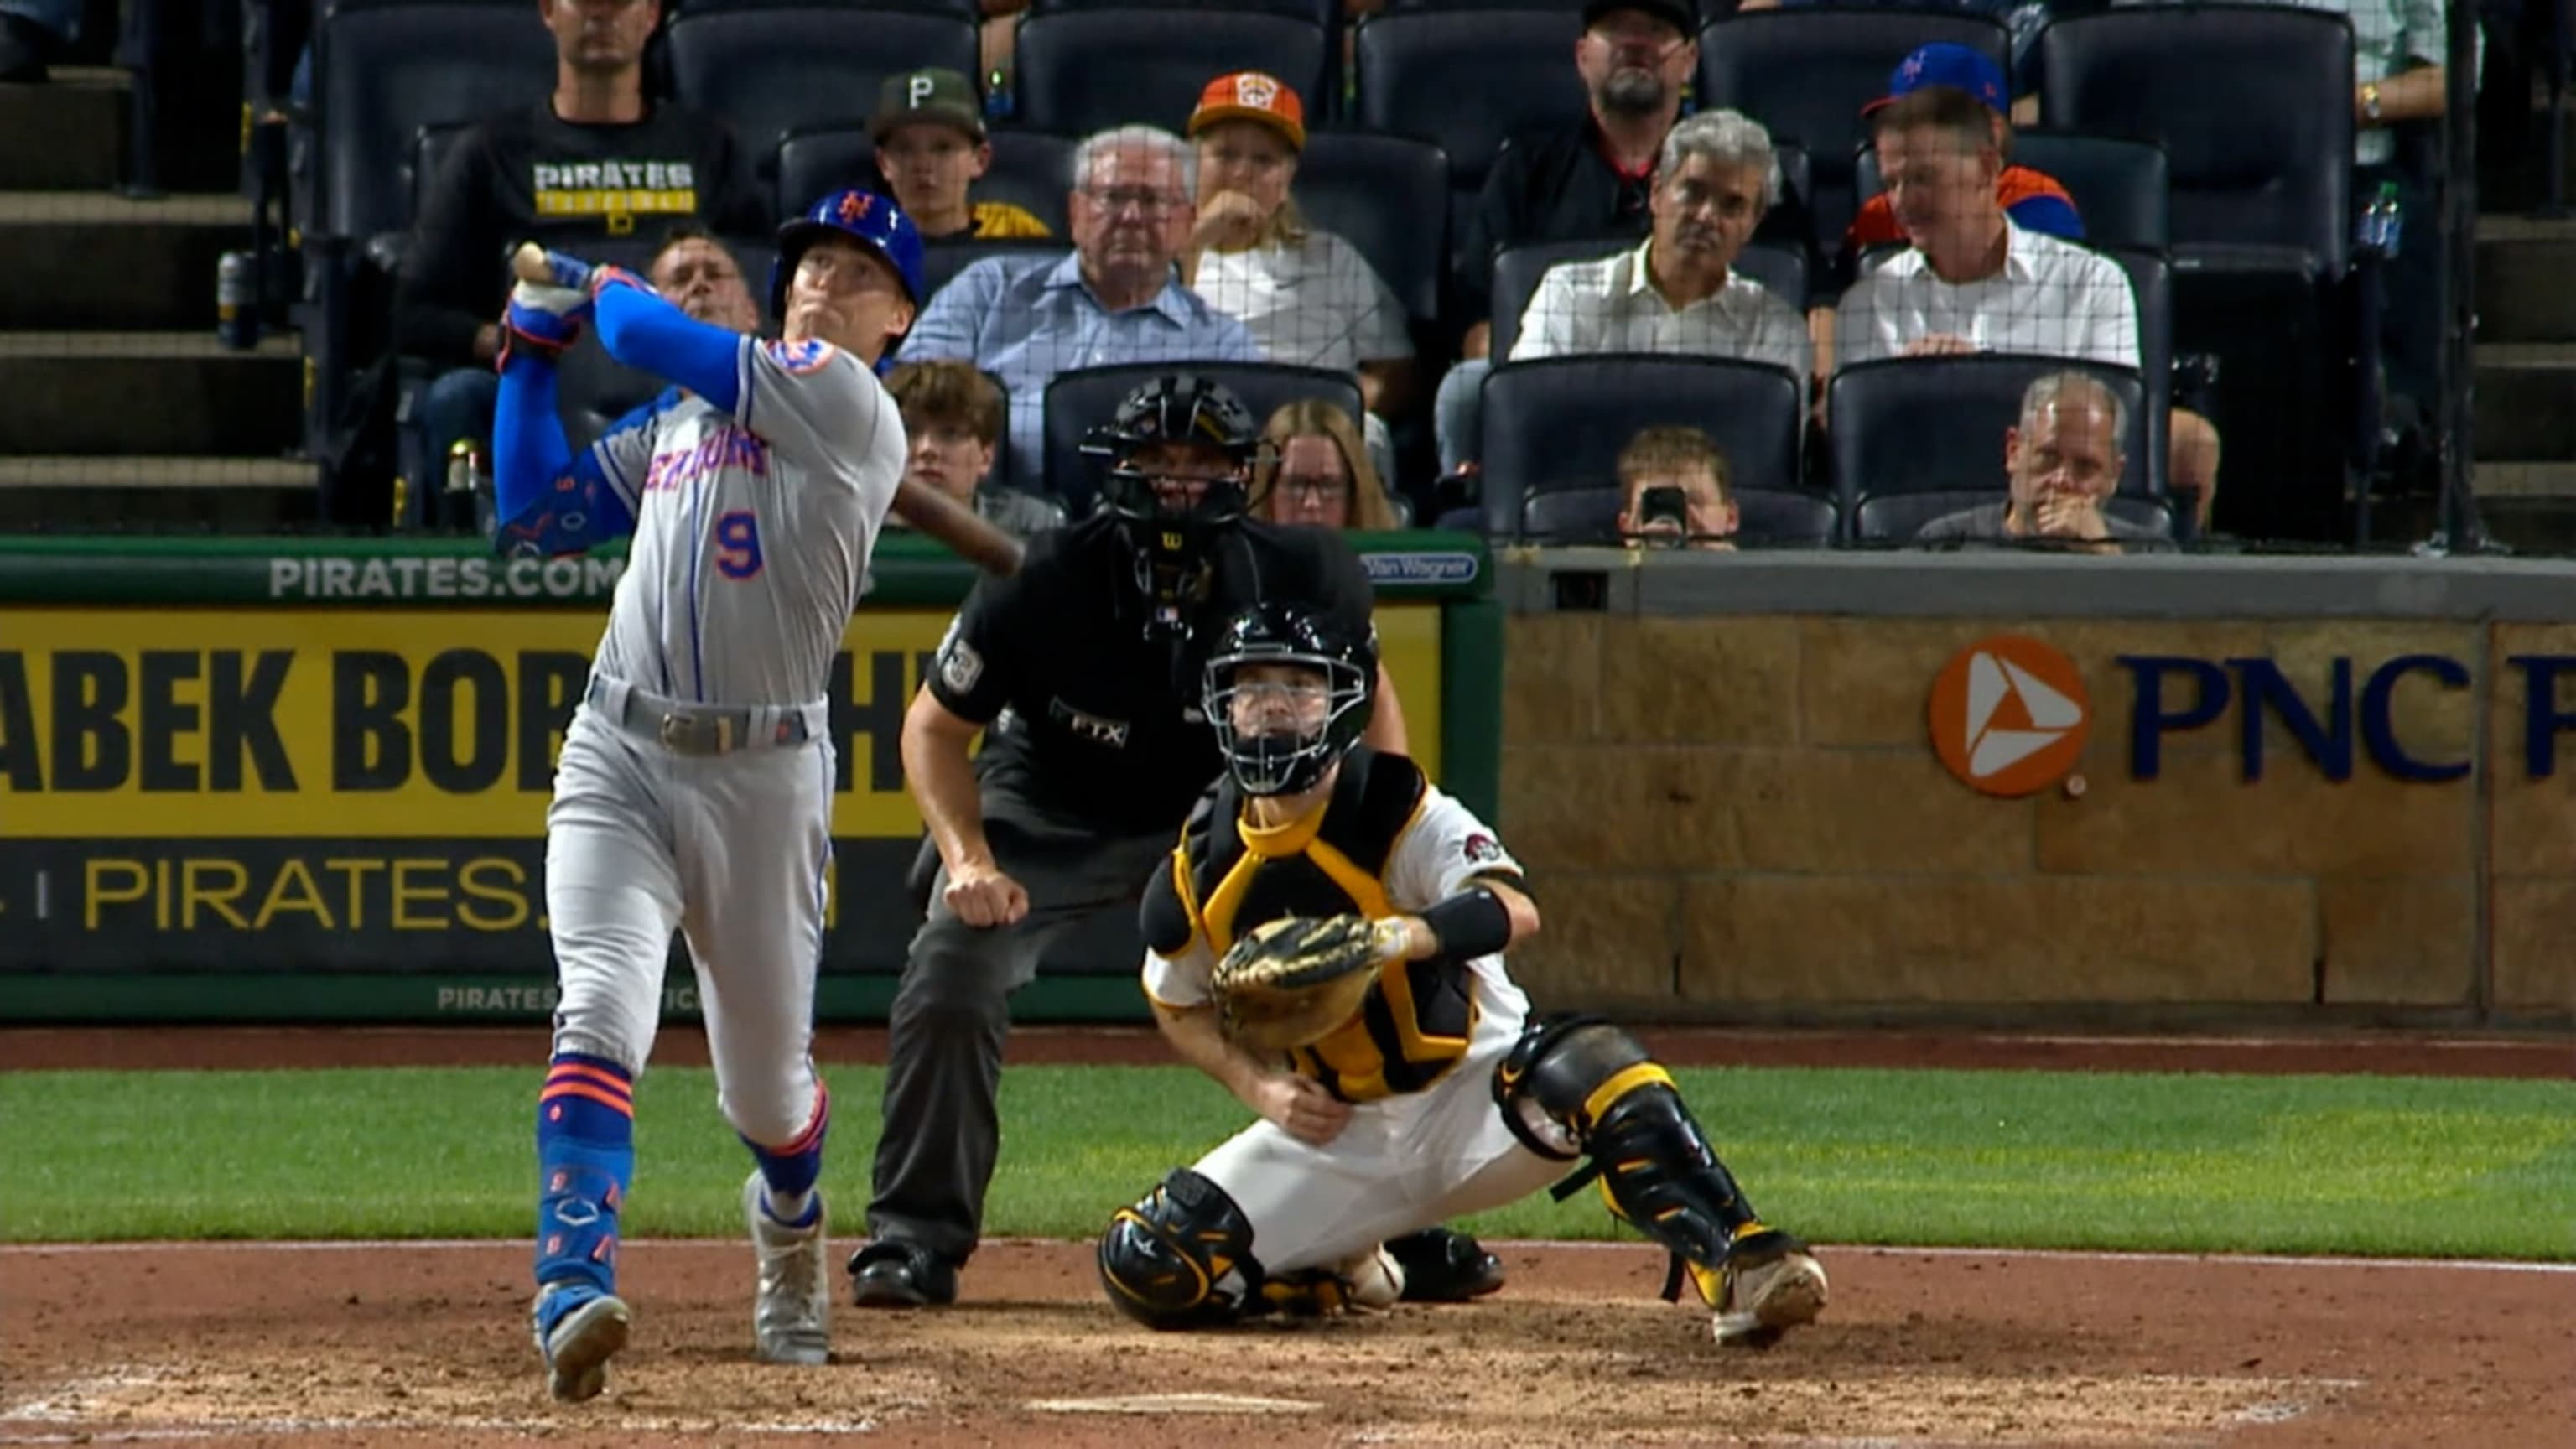 Mets rally to beat Pirates after rough first inning